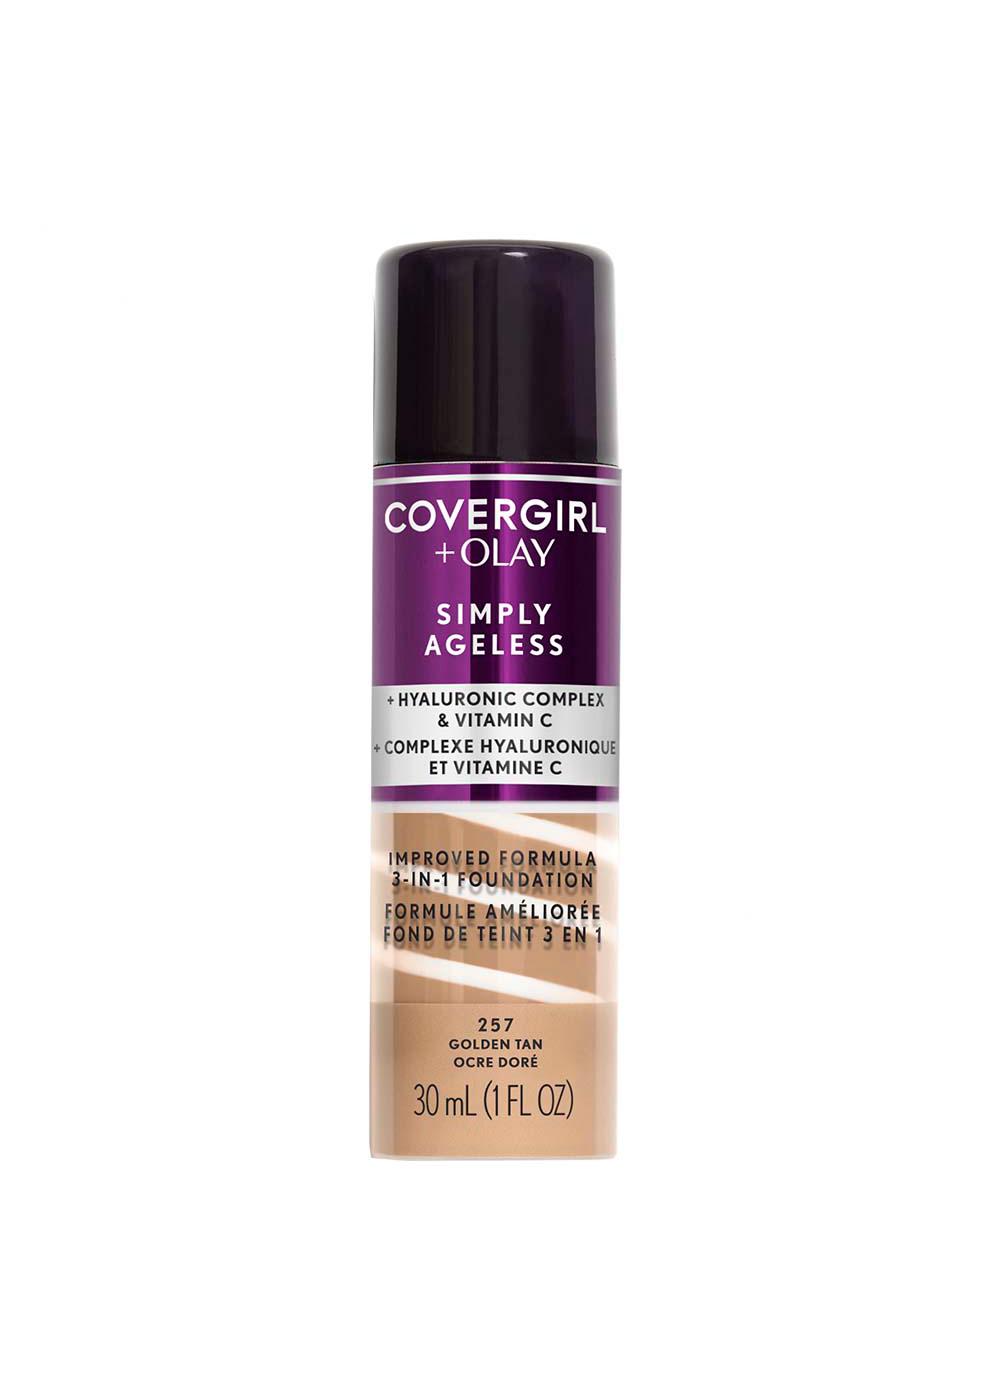 Covergirl Simply Ageless 3-in-1 Liquid Foundation 257 Golden Tan; image 1 of 6